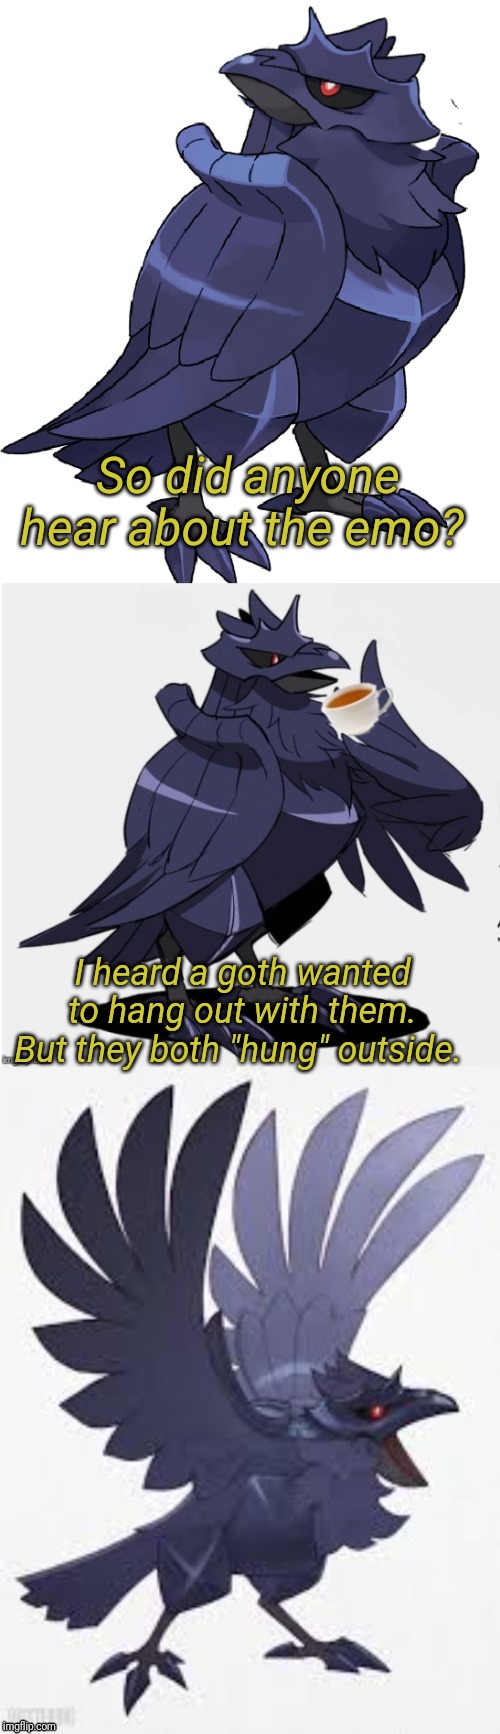 To celebrate how many followers this stream has, I have made a new template. No need to thank this clever Corviknight, ay? | So did anyone hear about the emo? I heard a goth wanted to hang out with them. But they both "hung" outside. | image tagged in bad pun ttdc,dark humor,suicide,new template | made w/ Imgflip meme maker